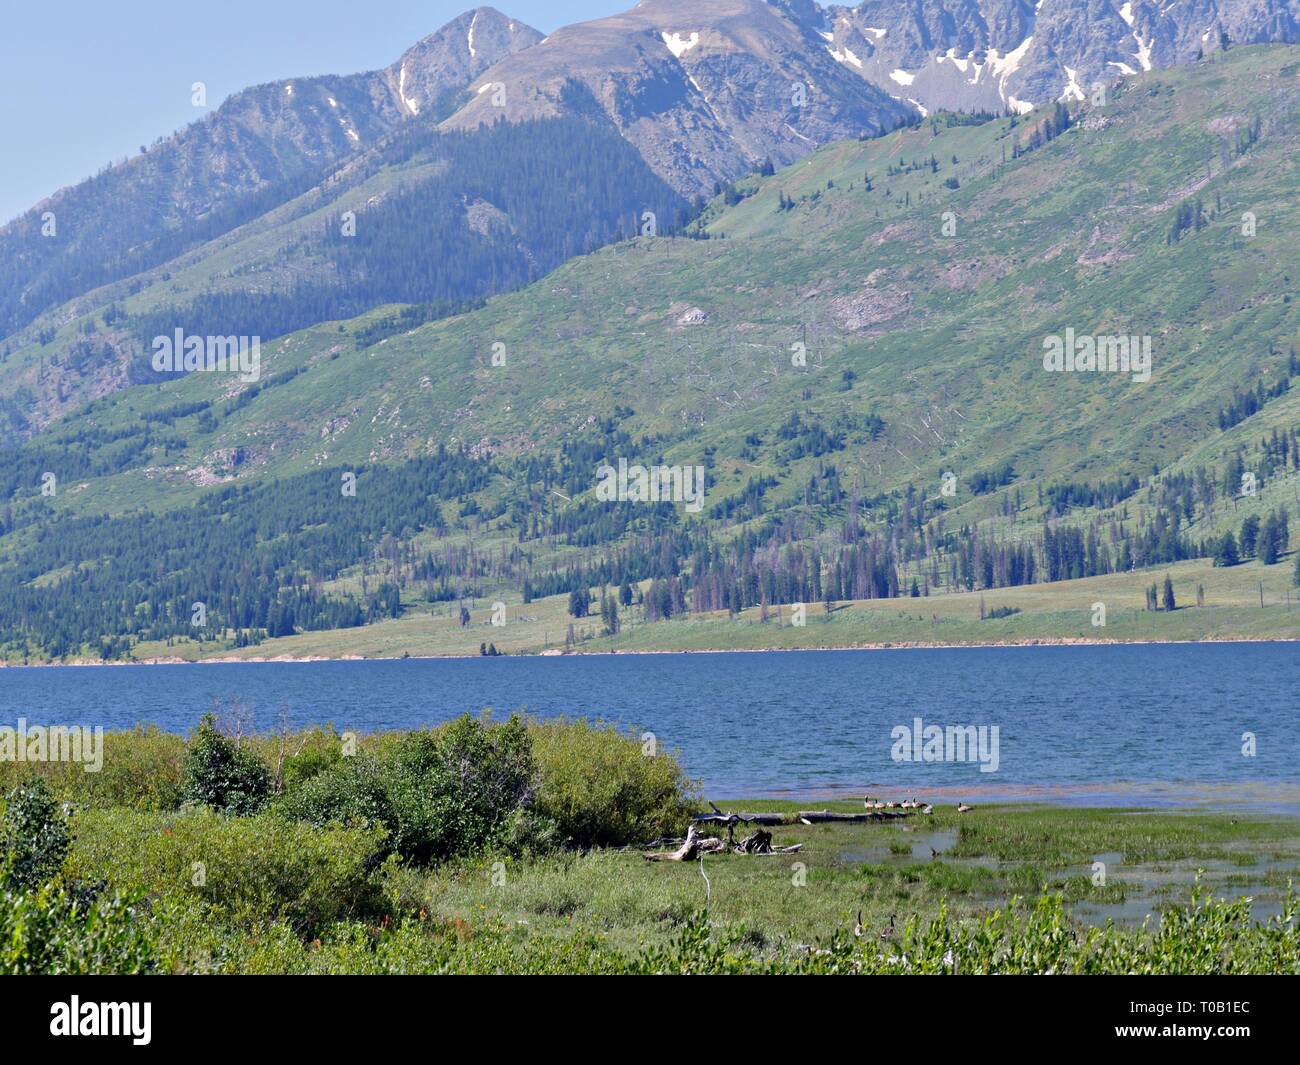 Medium close view of Jackson Lake at the Grand Teton National Park in Wyoming, seen from the roadside. Stock Photo